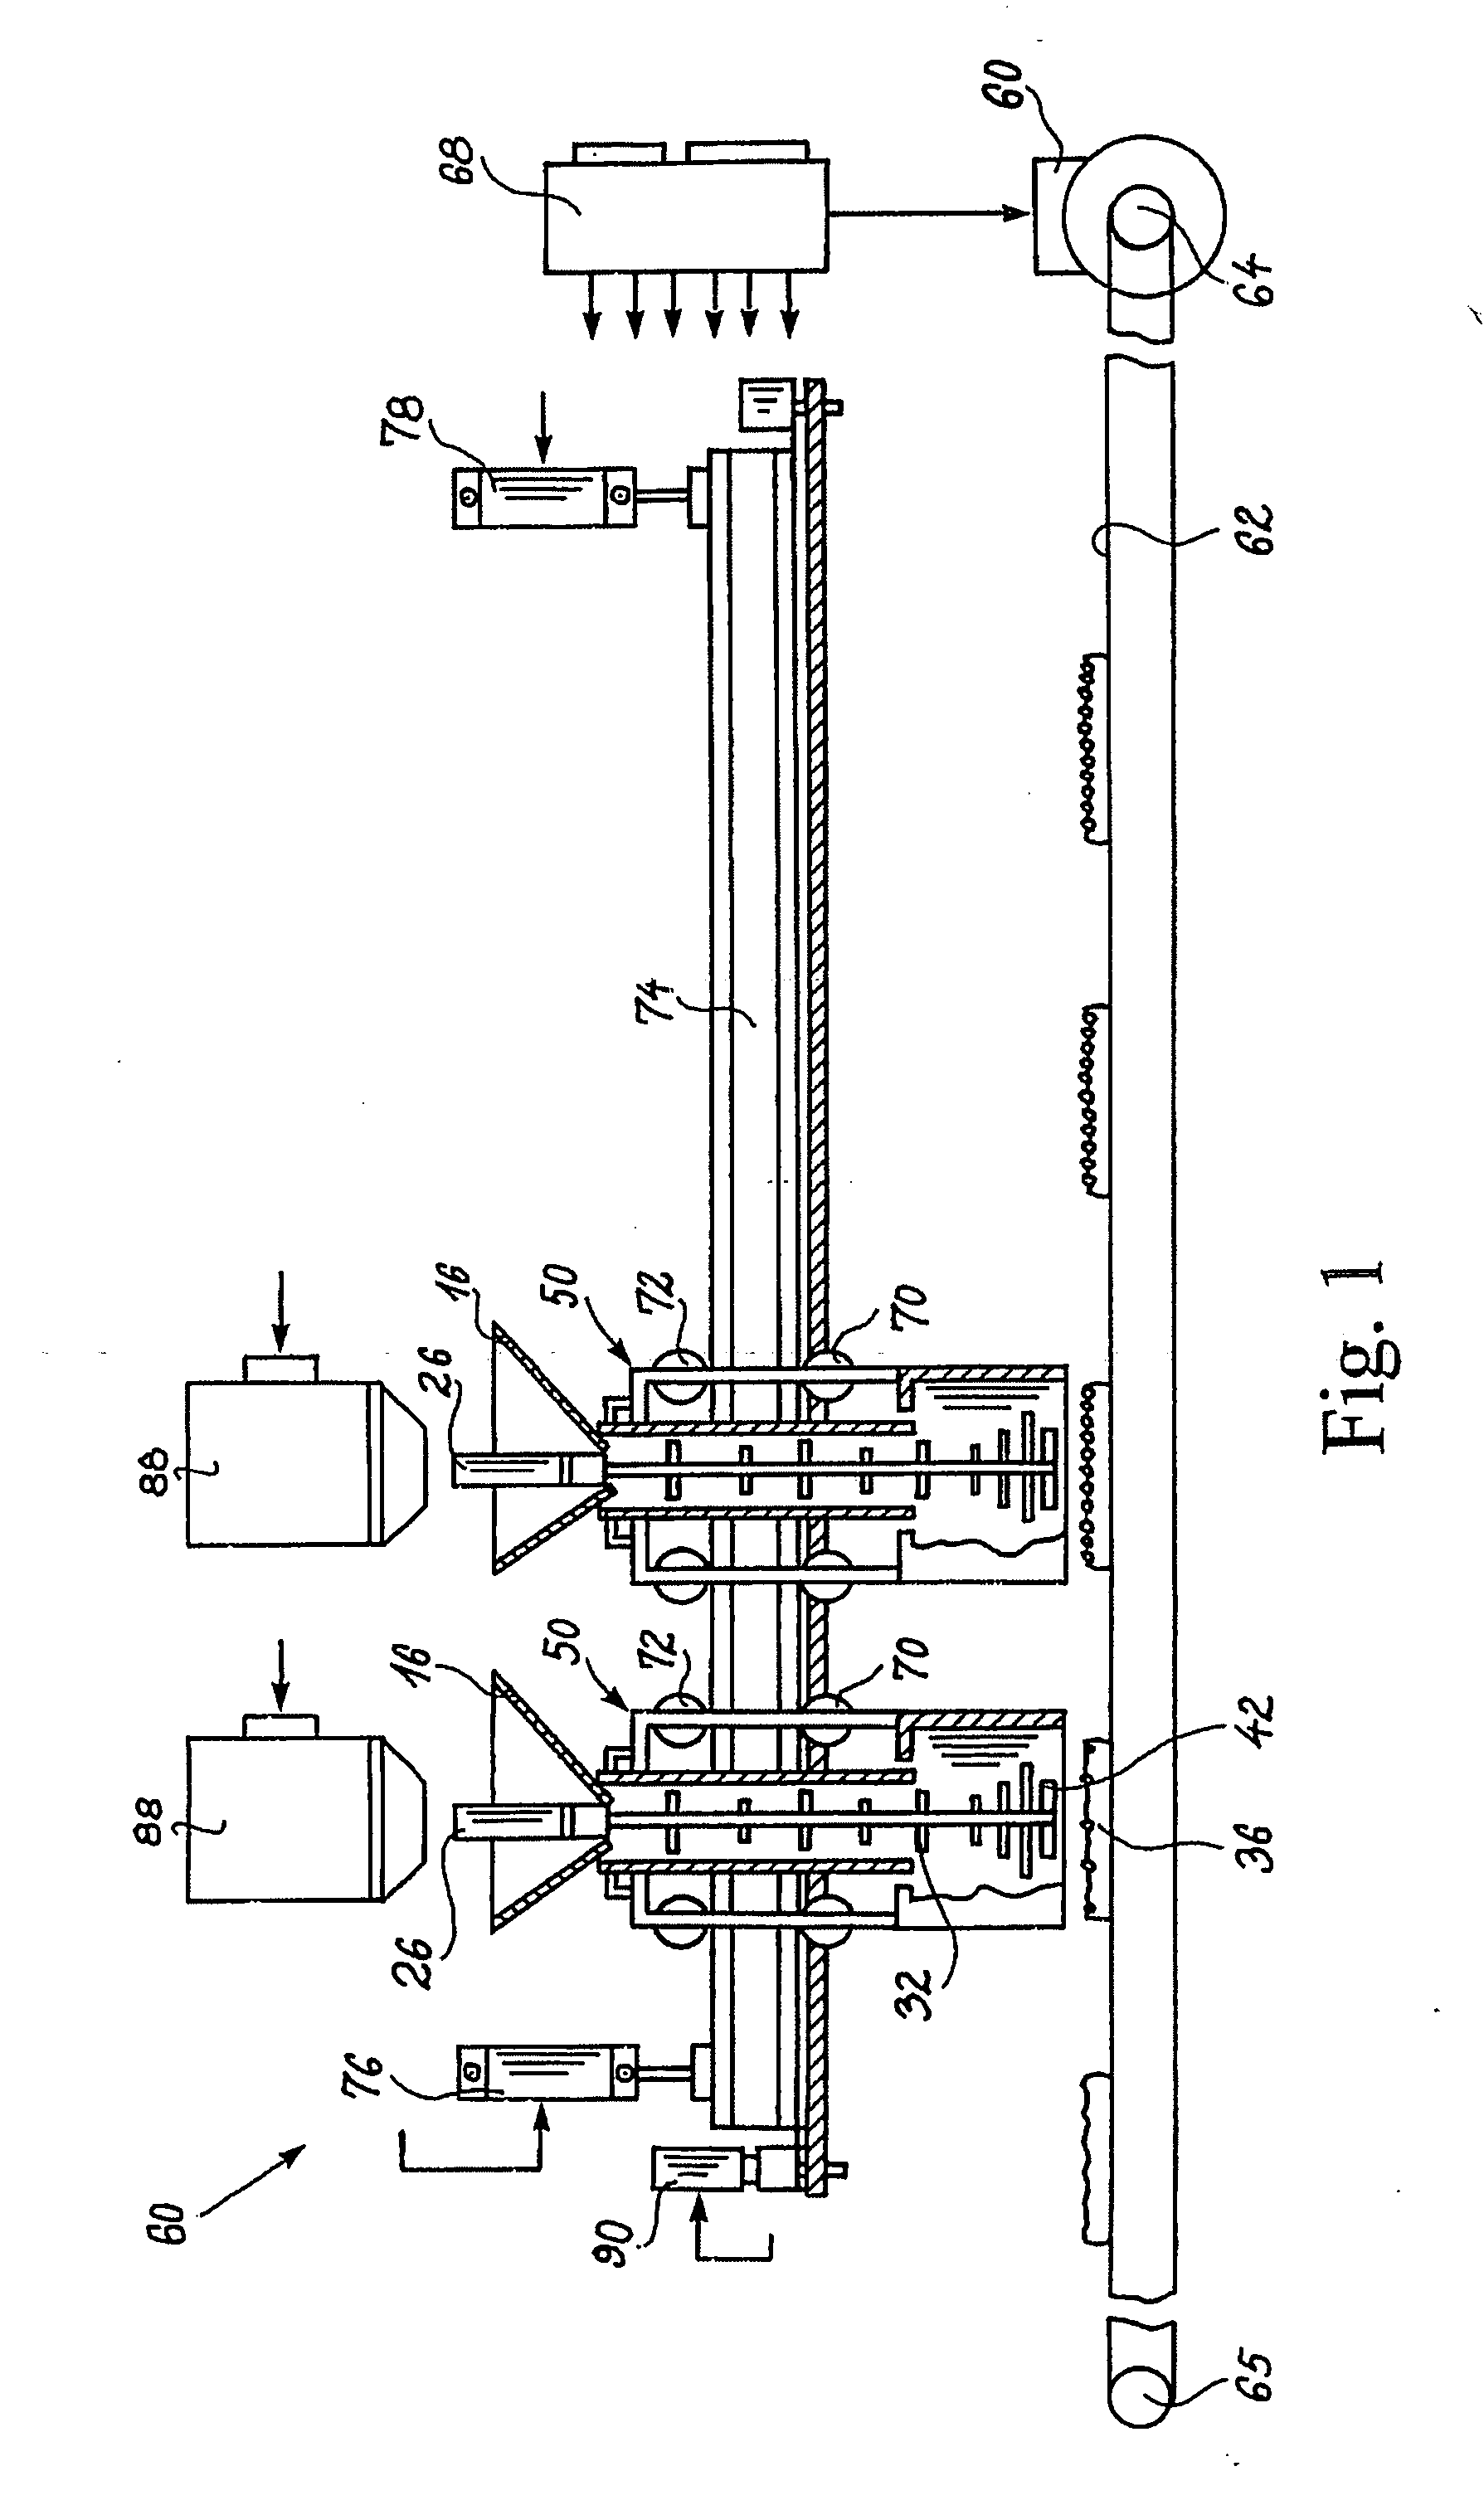 Method and apparatus for applying and distributing particulate material on a substrate